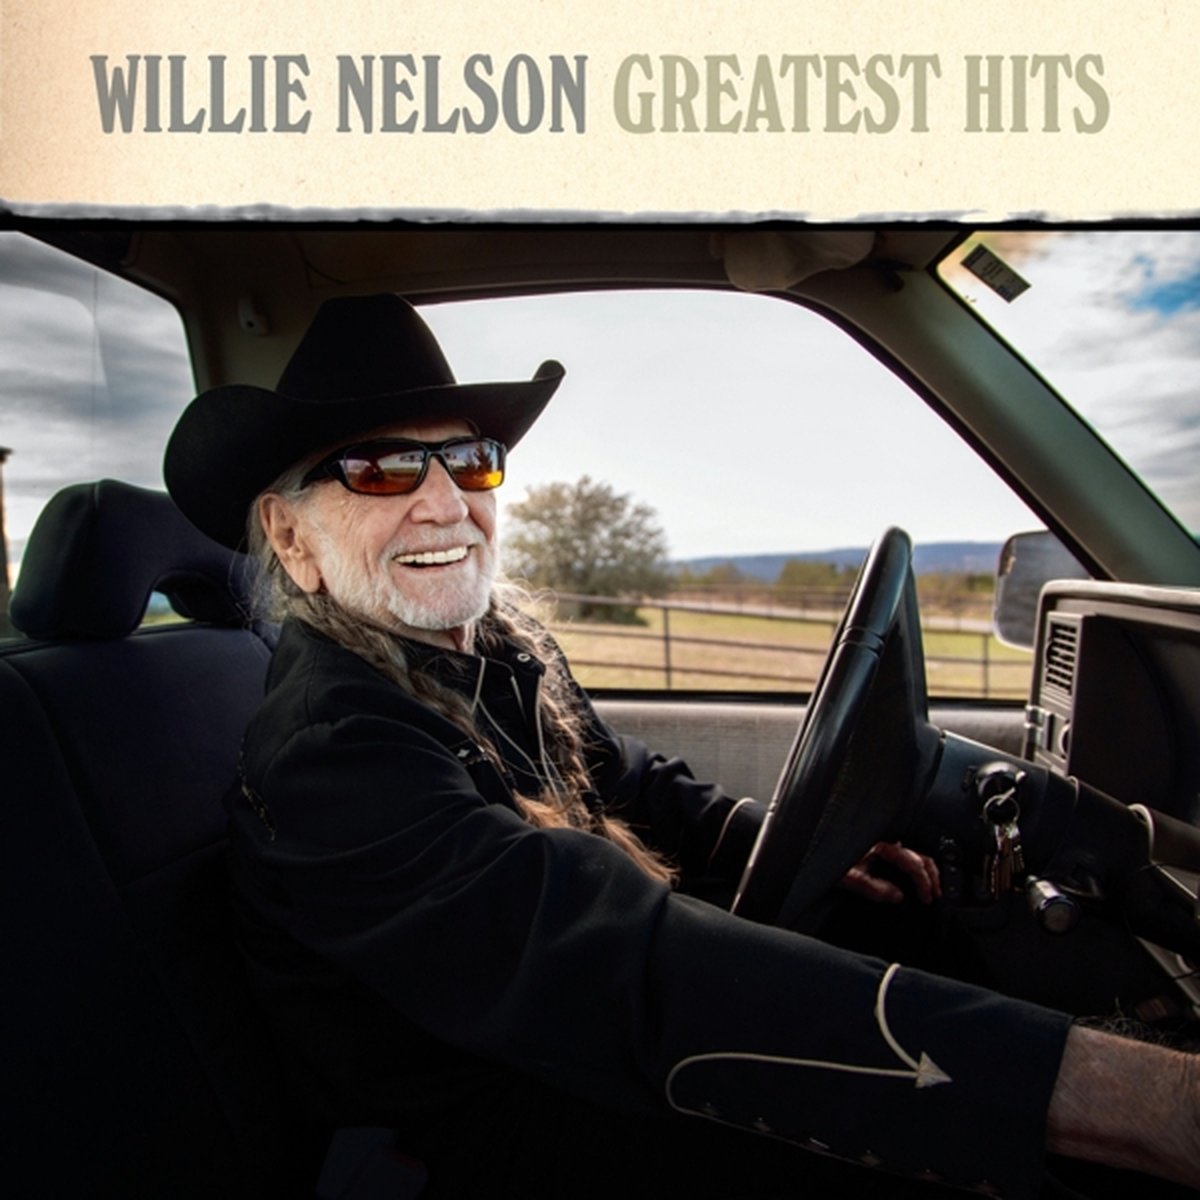 Willie Nelson - Greatest Hits (Cd) - Willie Nelson